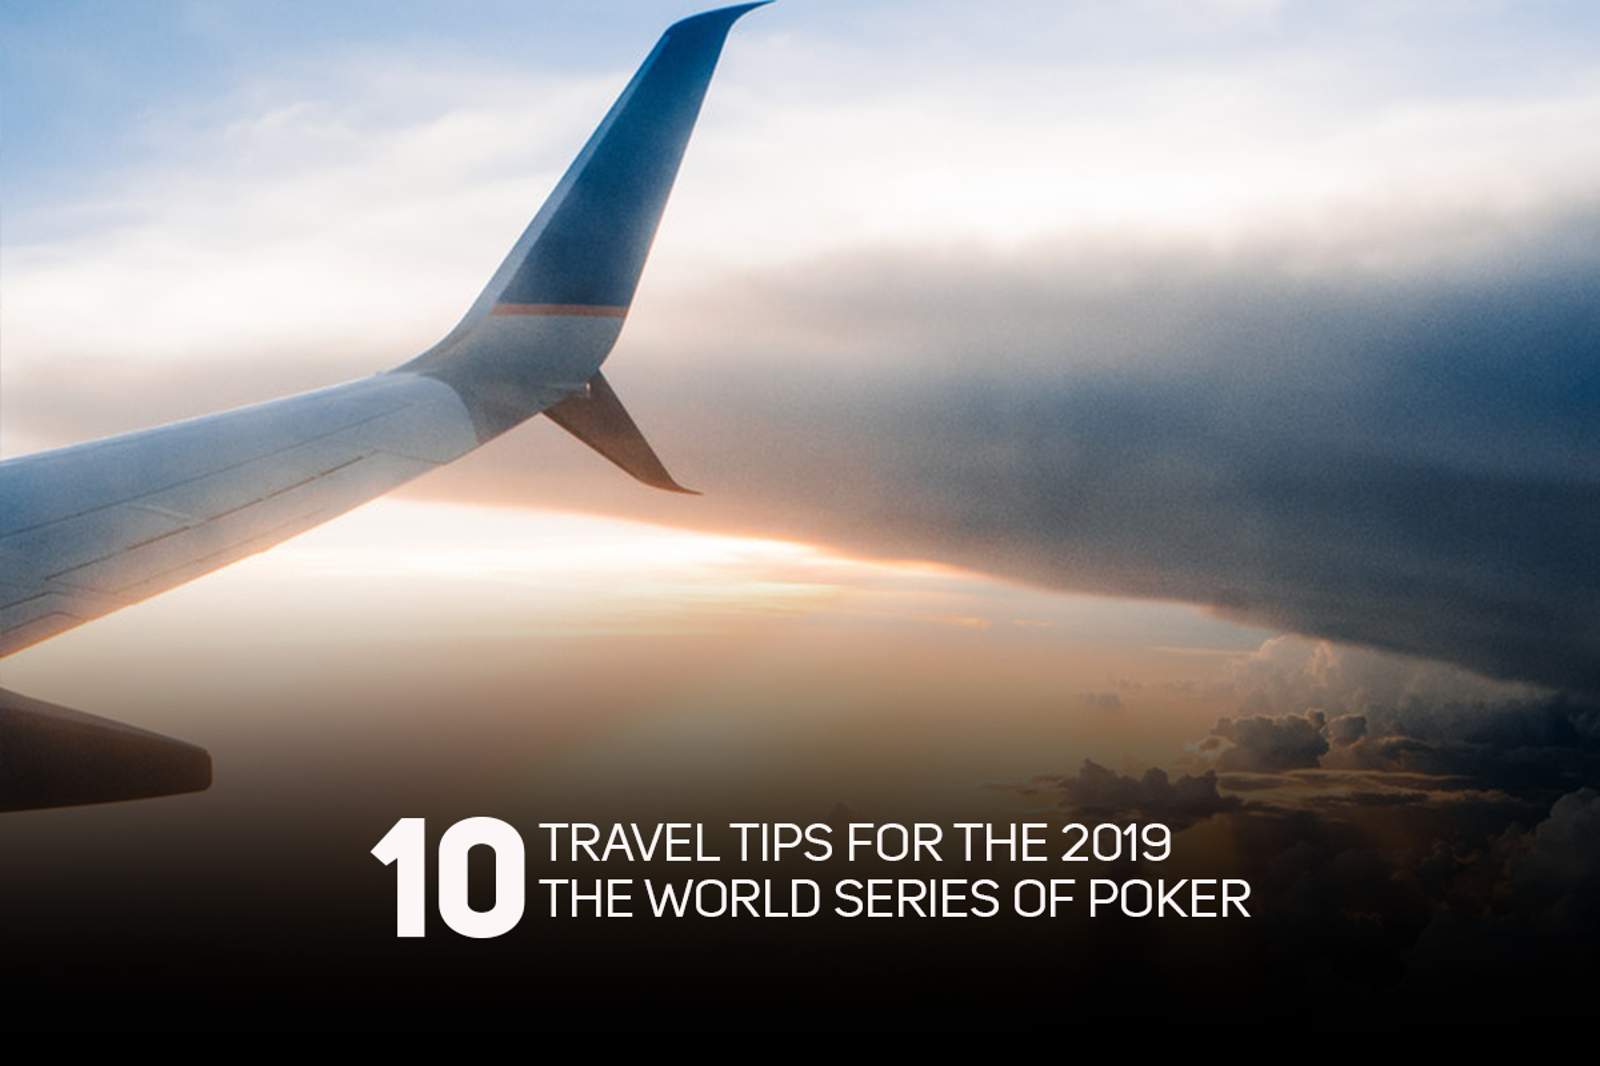 Top 10 Travel Tips for the 2019 World Series of Poker